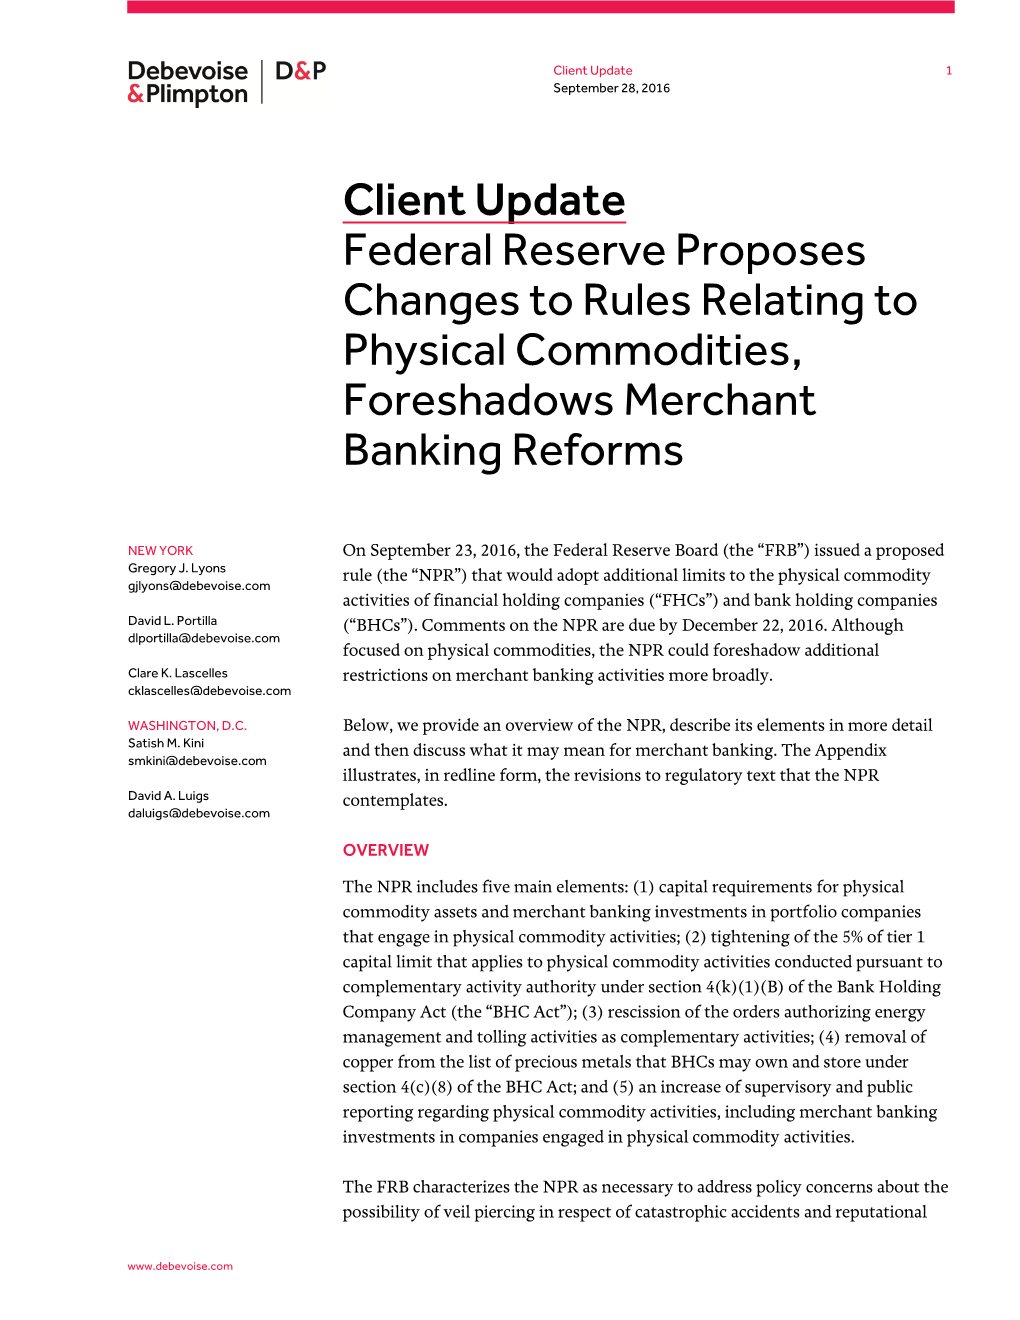 Client Update Federal Reserve Proposes Changes to Rules Relating to Physical Commodities, Foreshadows Merchant Banking Reforms